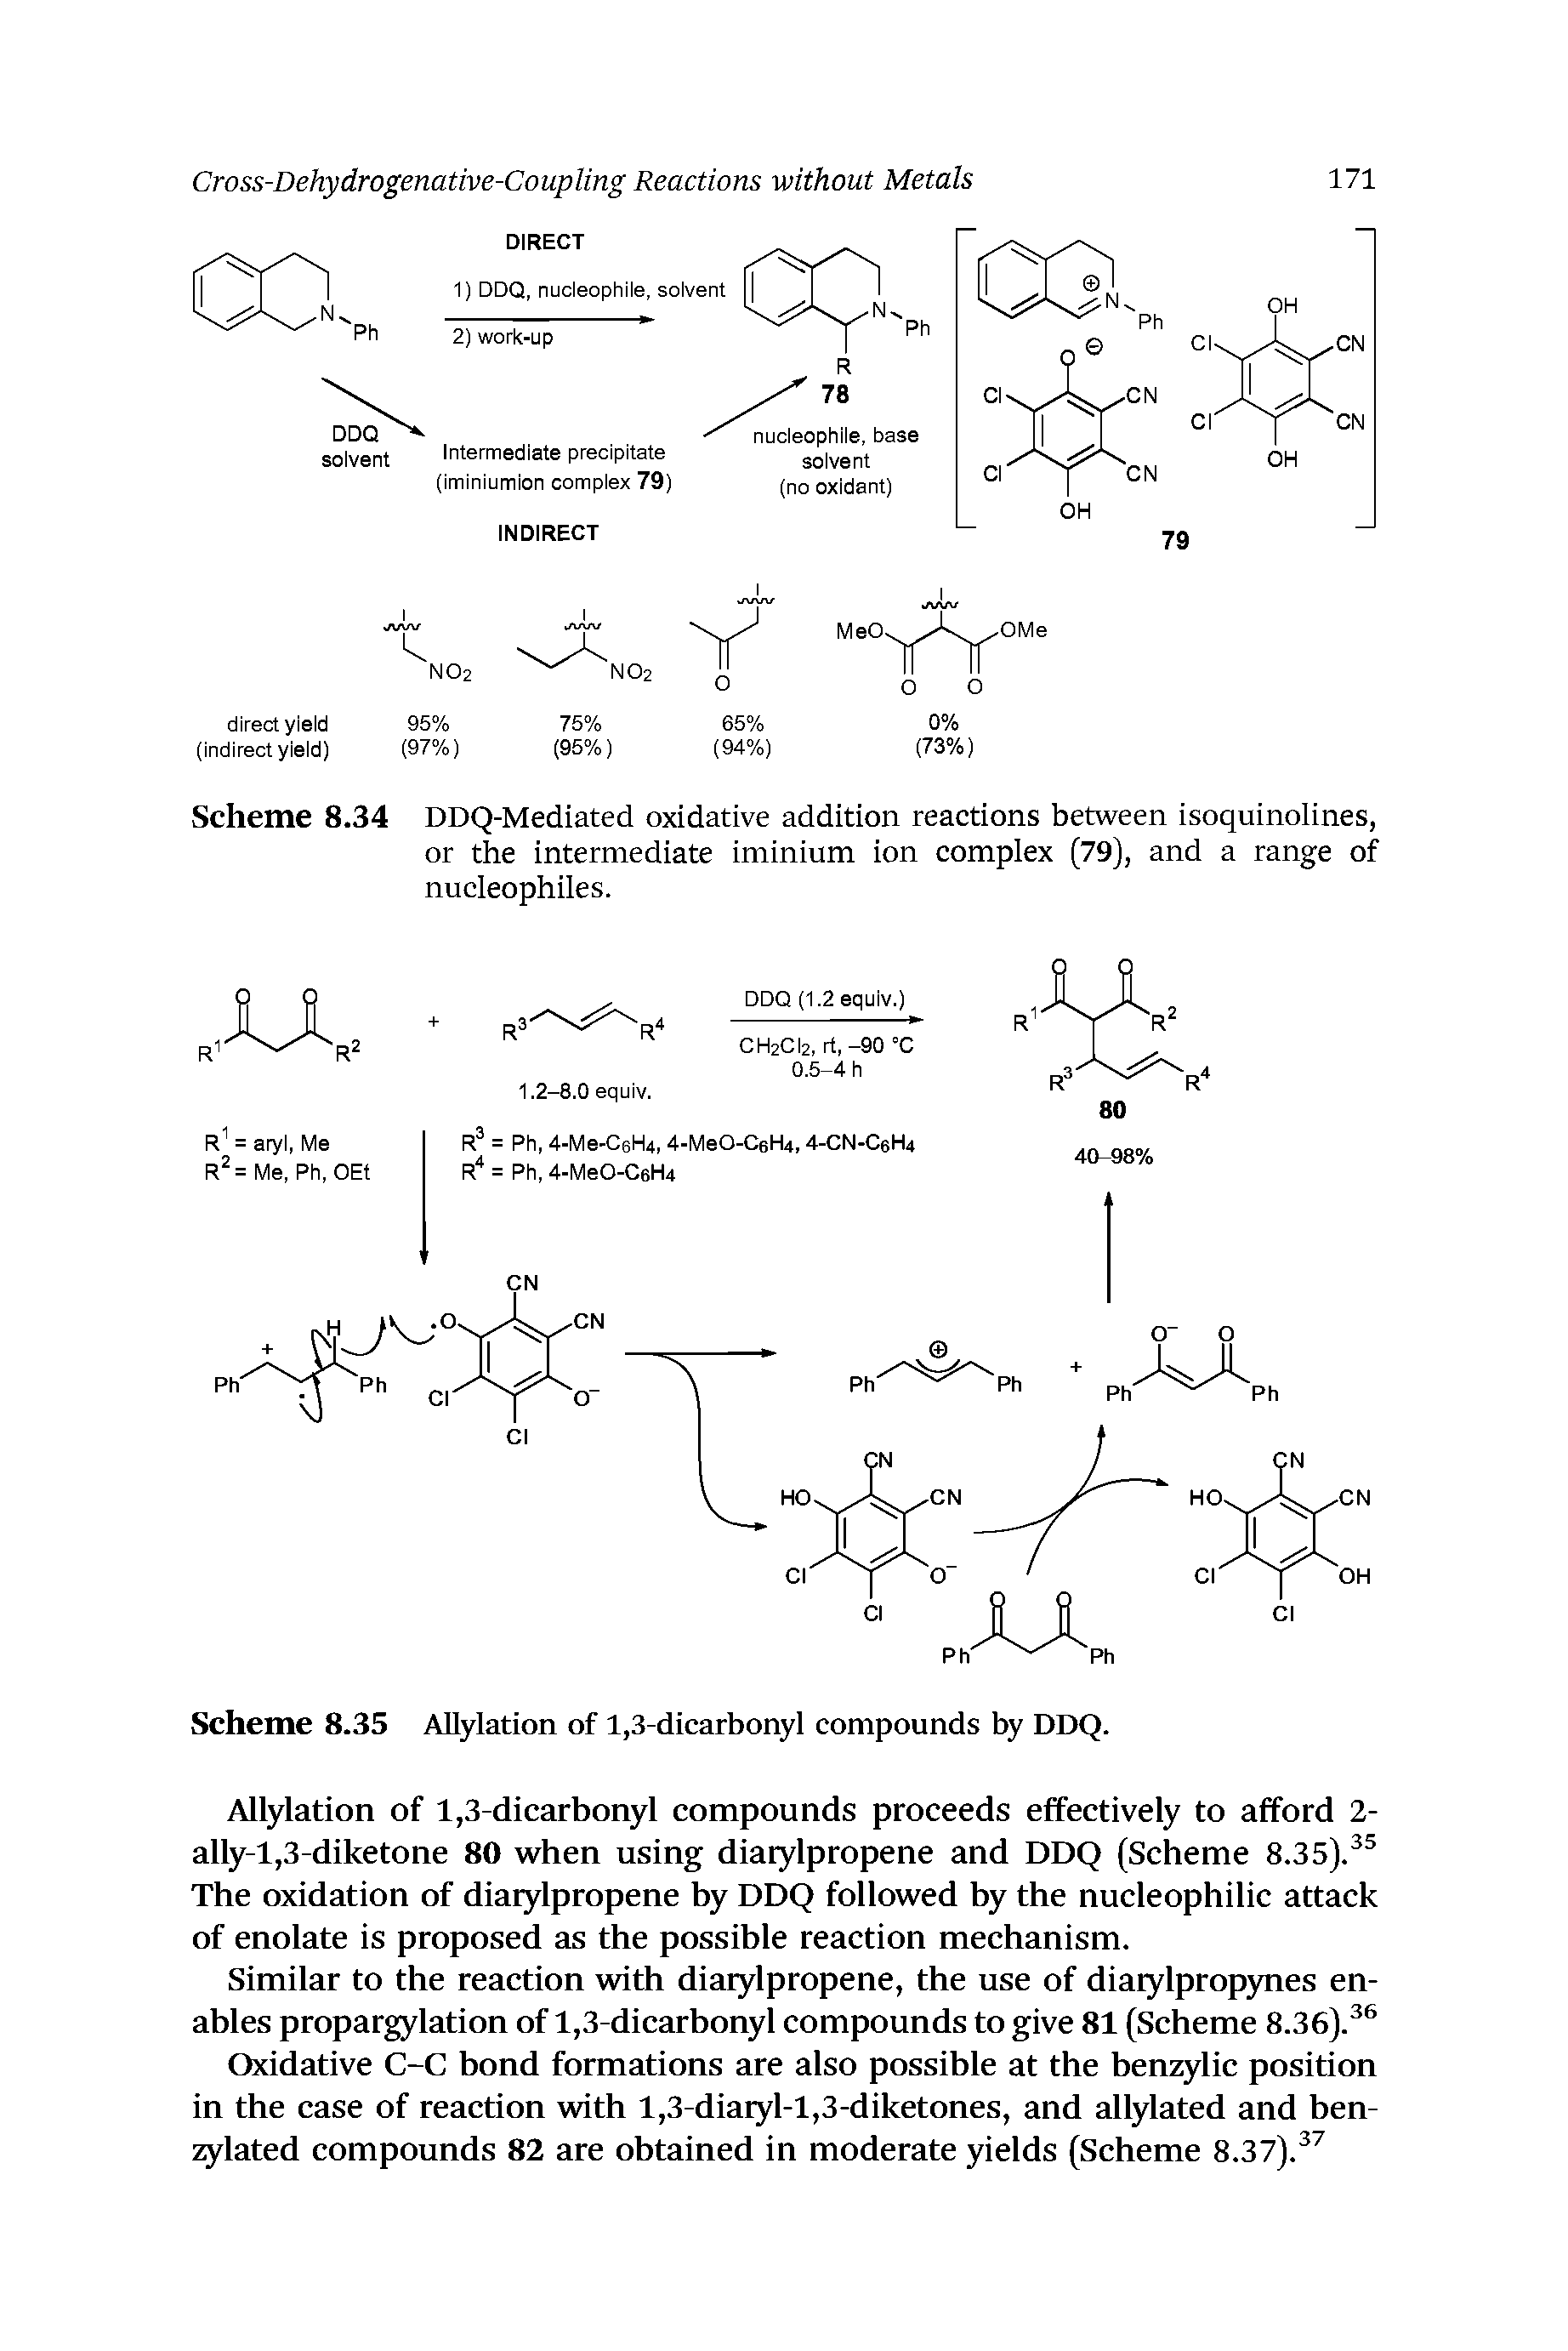 Scheme 8.34 DDQ-Mediated oxidative addition reactions between isoquinolines, or the intermediate iminium ion complex (79), and a range of nucleophiles.